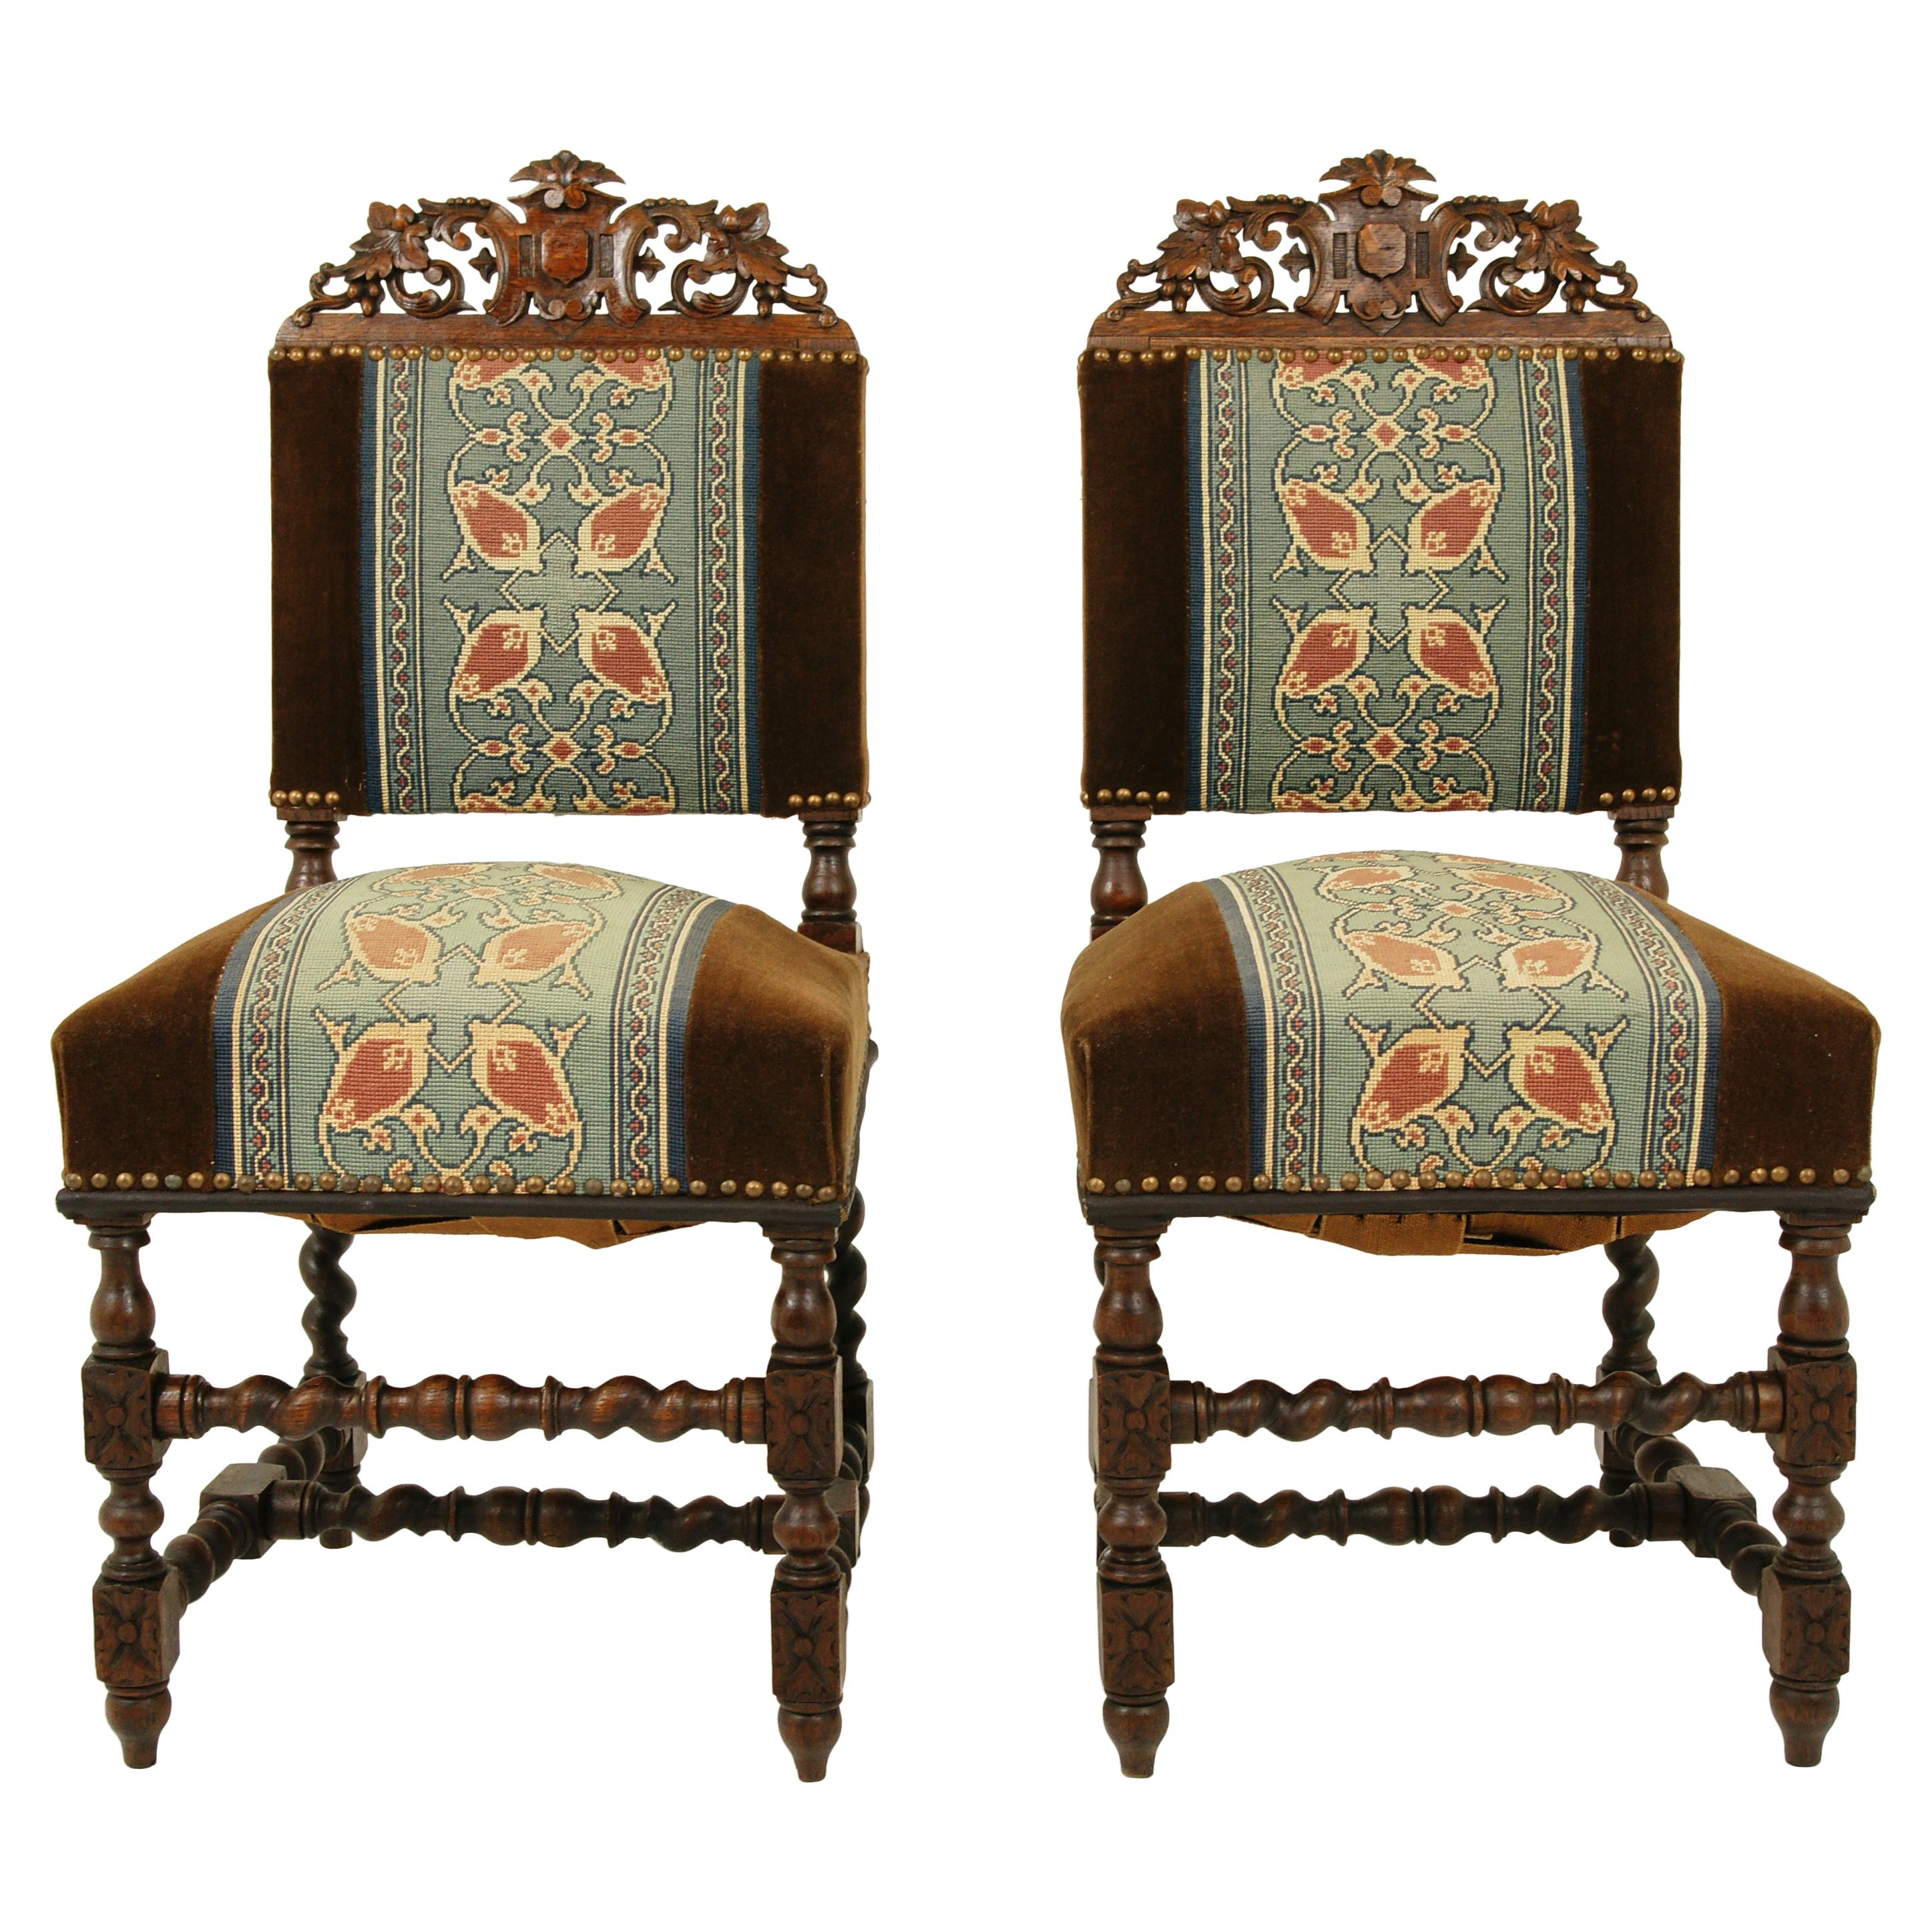 Antique Pair of Chairs, Carved Oak, Barley Twist, Upholstered, Scotland 1870